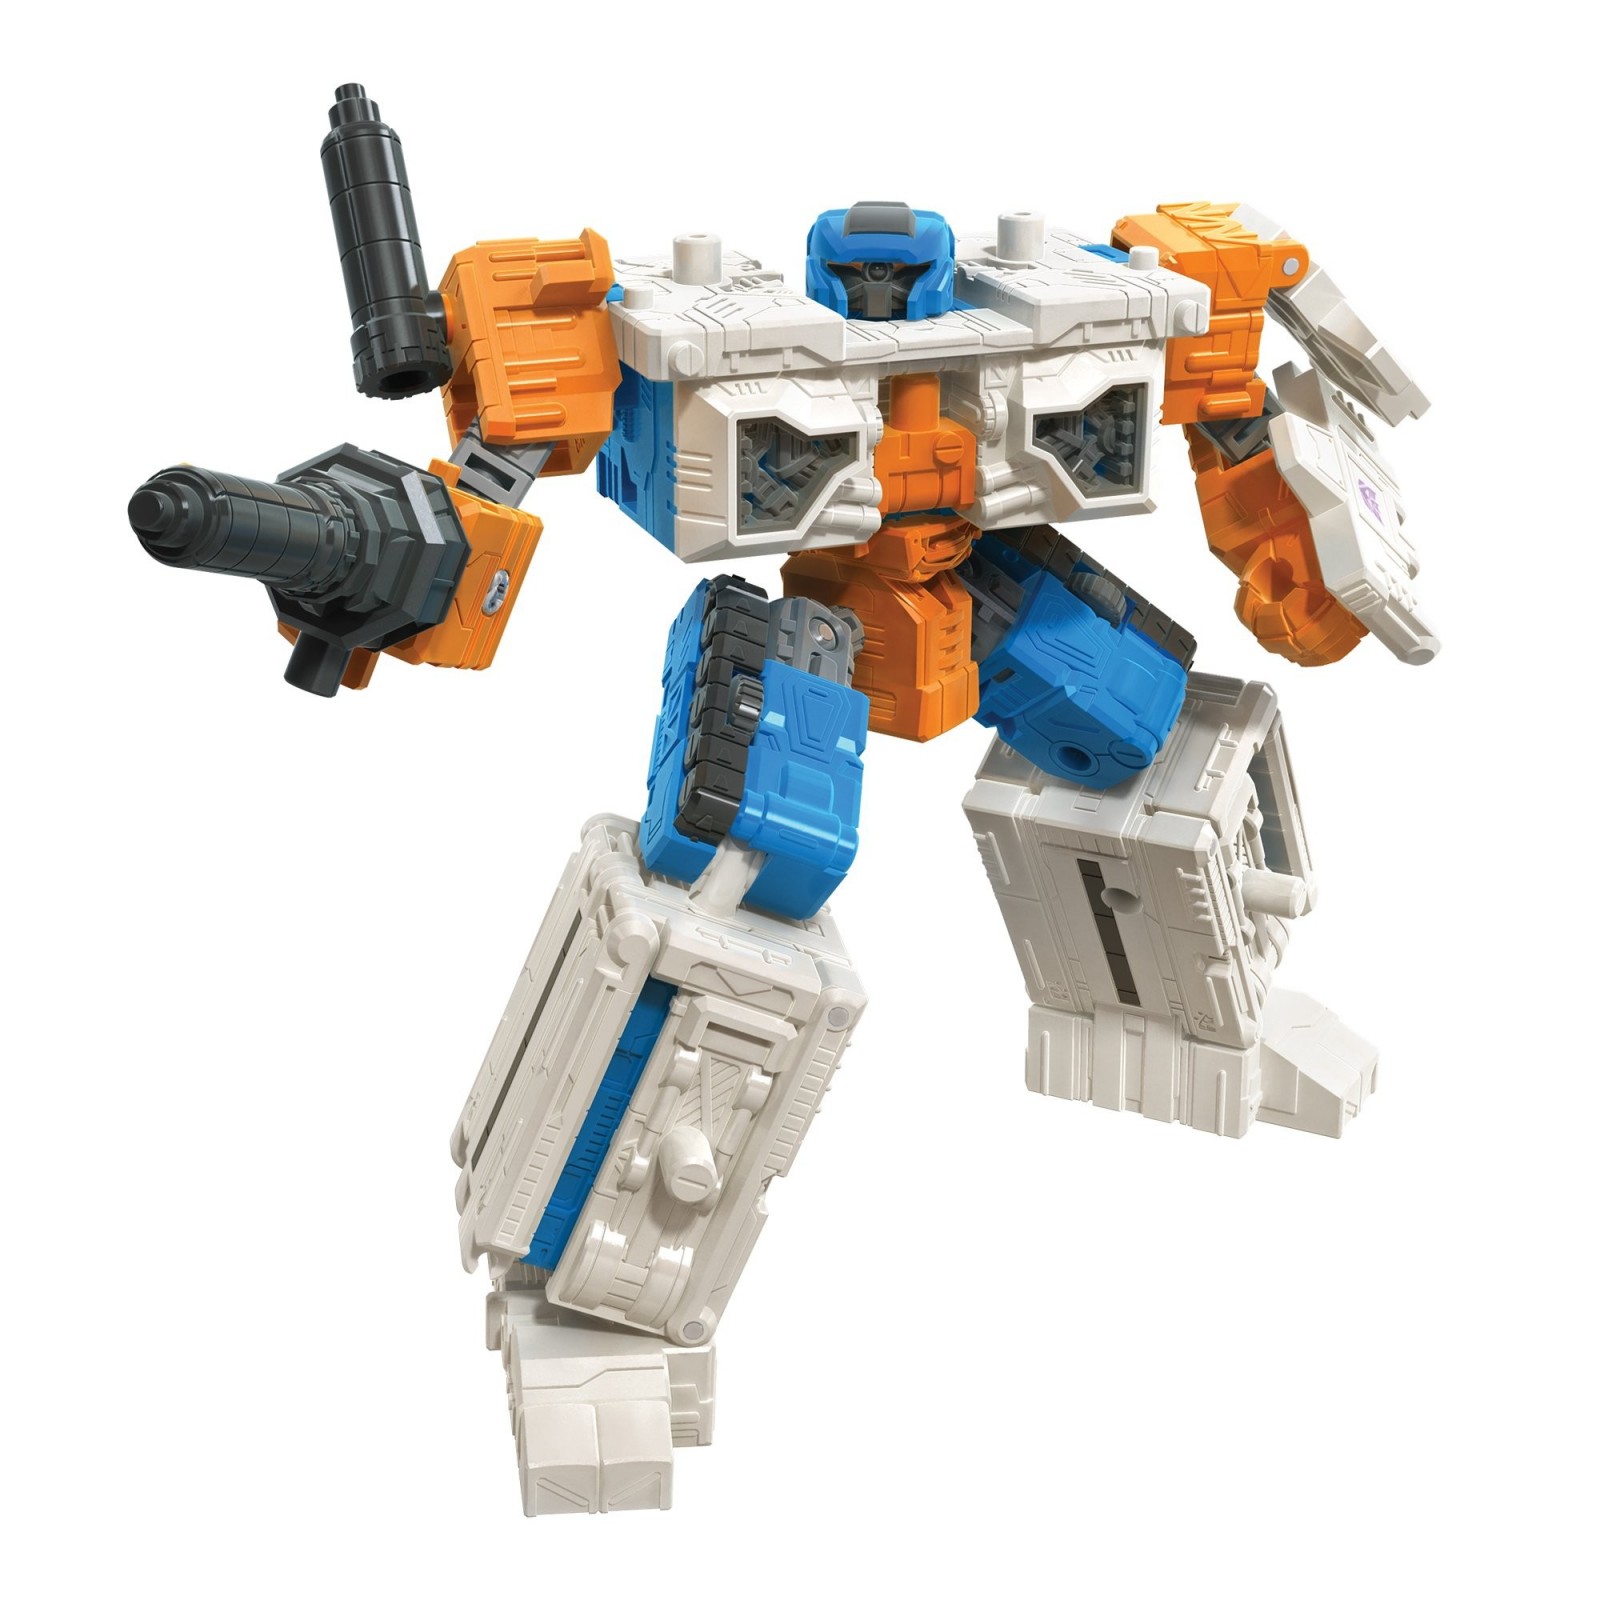 Transformers News: Transformers War for Cybertron Earthrise Official Images - Alicon, Quintesson, Doubledealer, and Mor